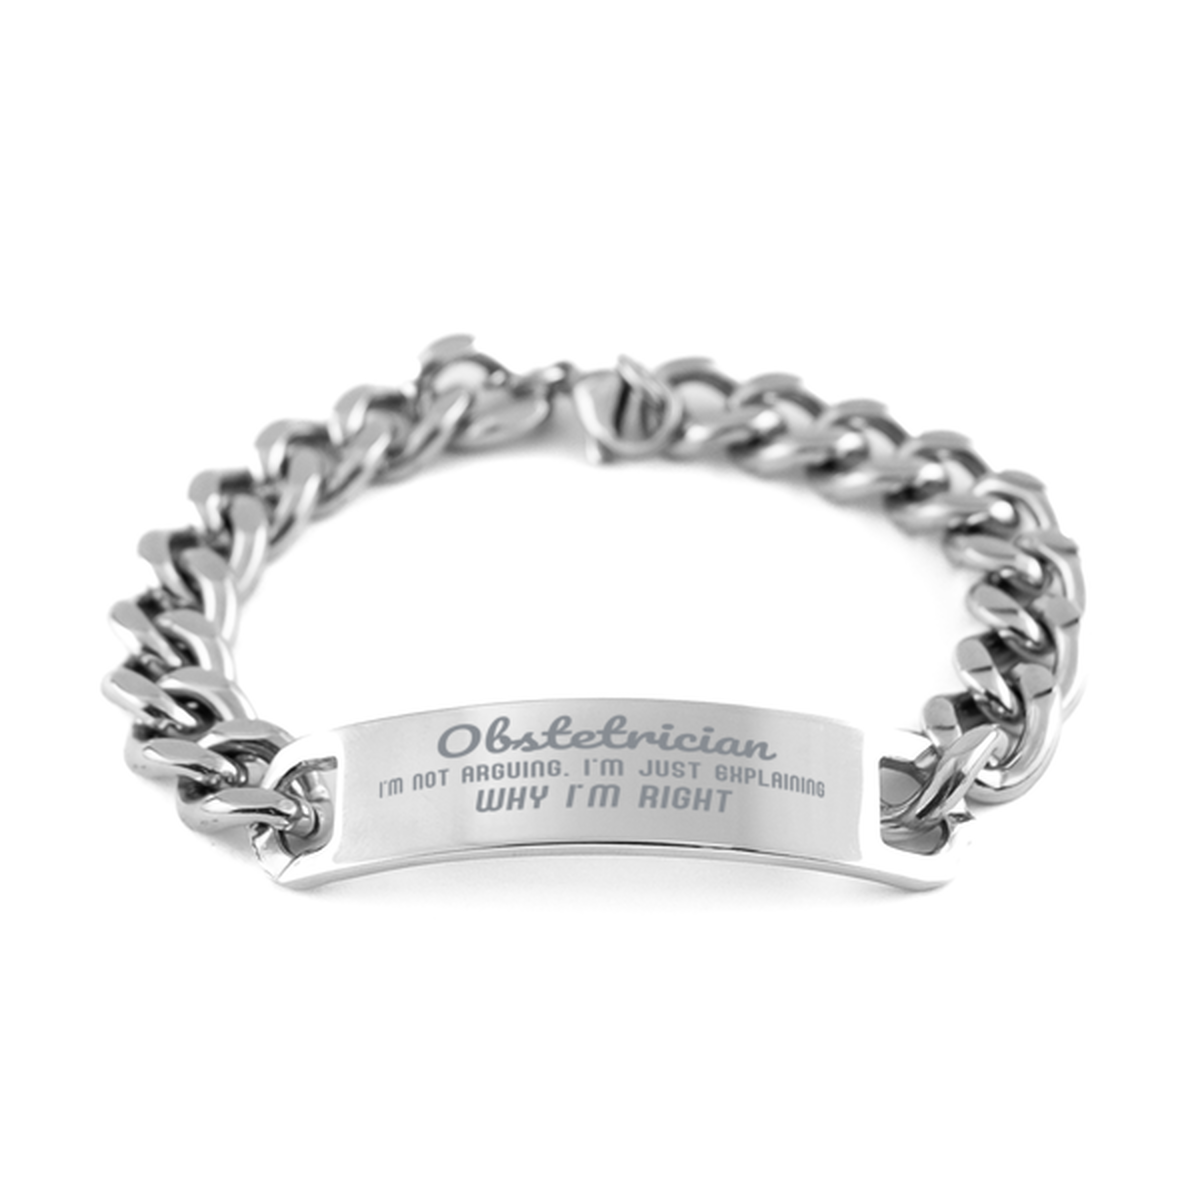 Obstetrician I'm not Arguing. I'm Just Explaining Why I'm RIGHT Cuban Chain Stainless Steel Bracelet, Graduation Birthday Christmas Obstetrician Gifts For Obstetrician Funny Saying Quote Present for Men Women Coworker